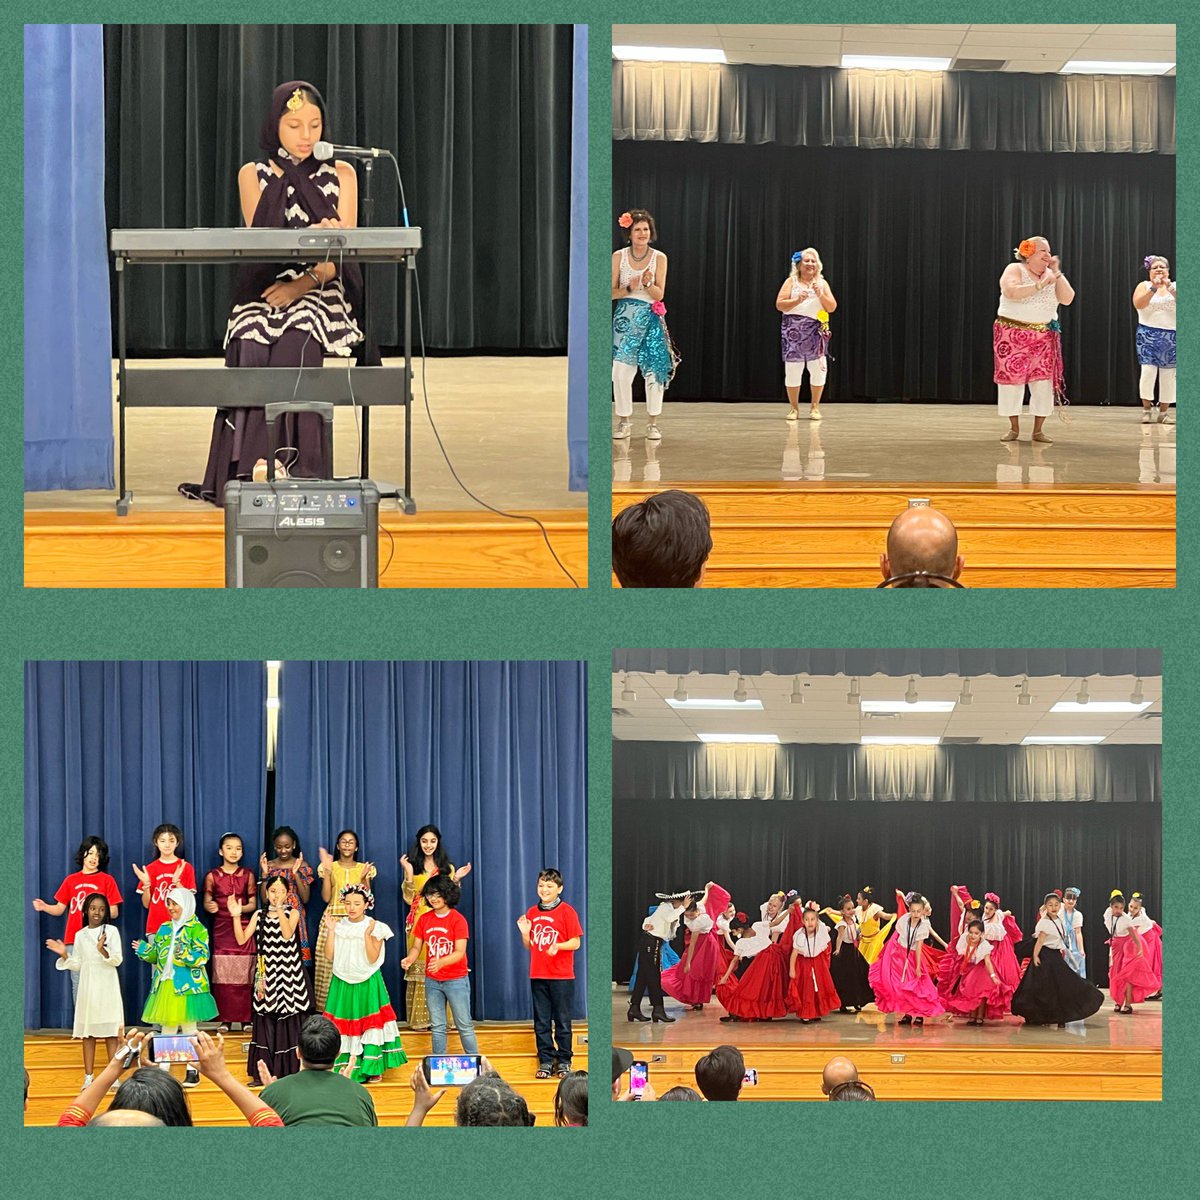 So many @NISDMead Mountaineers showed up to represent their country for our Multicultural Night! There was performances, music, food, art, treats and outfits! What an amazing night!